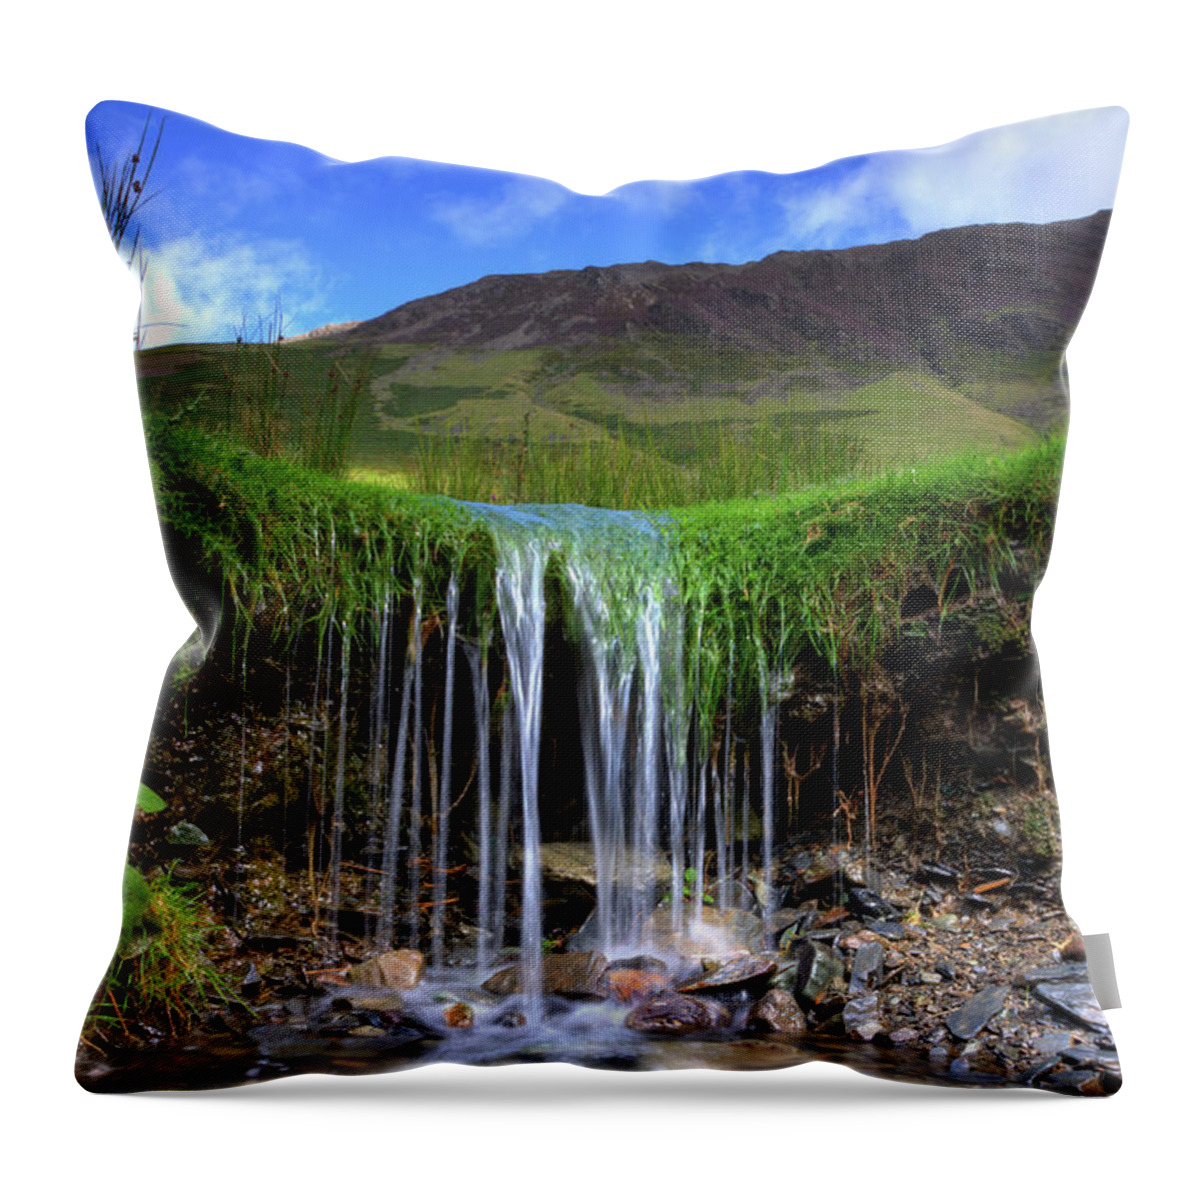 Uk Throw Pillow featuring the photograph Waterfall In Miniature, Lake District by Tom Holmes Photography